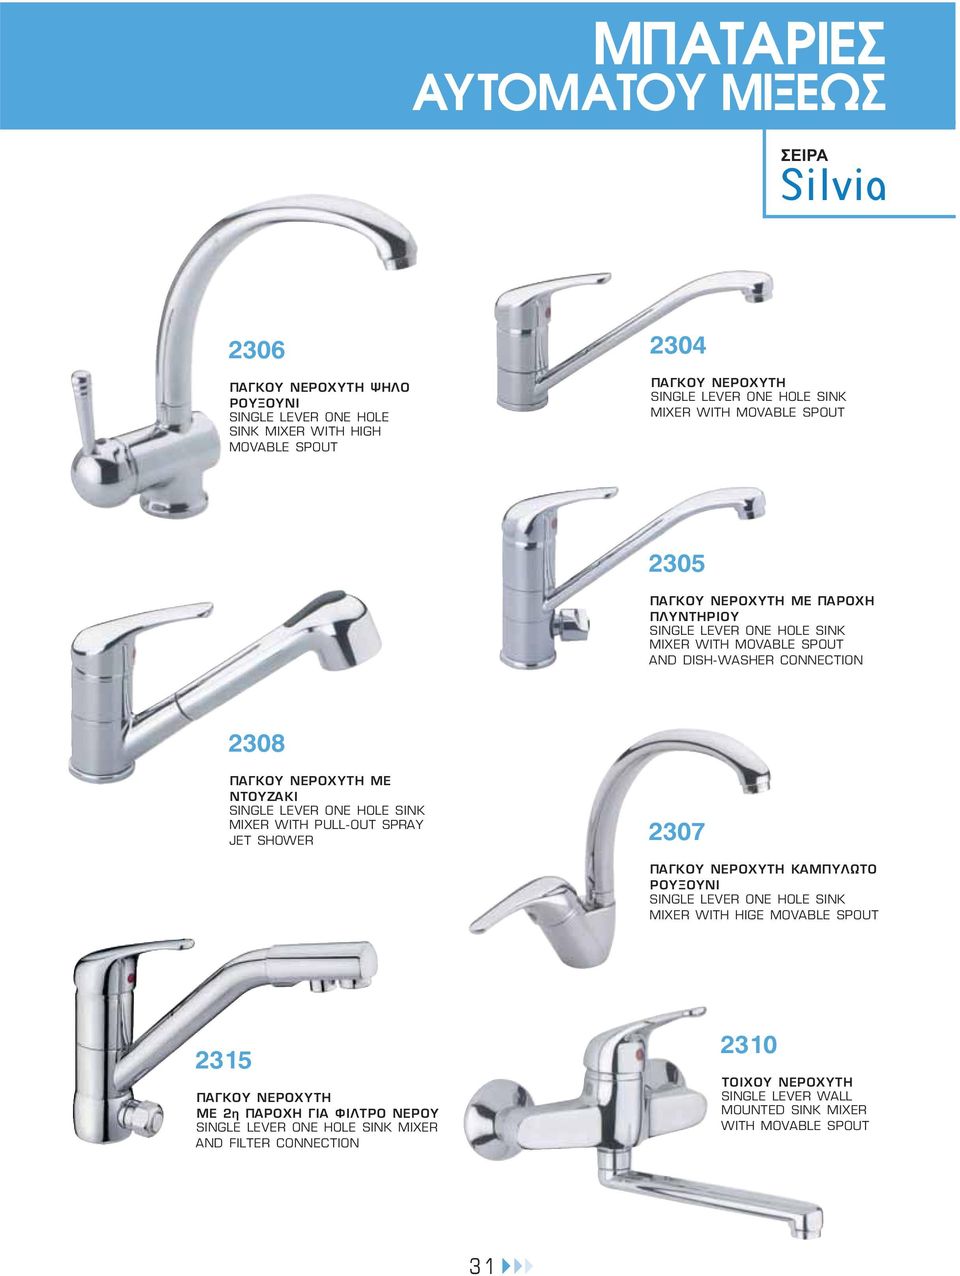 WITH PULL-OUT SPRAY JET SHOWER 2307 ΚΑΜΠΥΛΩΤΟ ΡΟΥΞΟΥΝΙ MIXER WITH HIGE MOVABLE SPOUT 2315 ΜΕ 2η ΠΑΡΟΧΗ ΓΙΑ